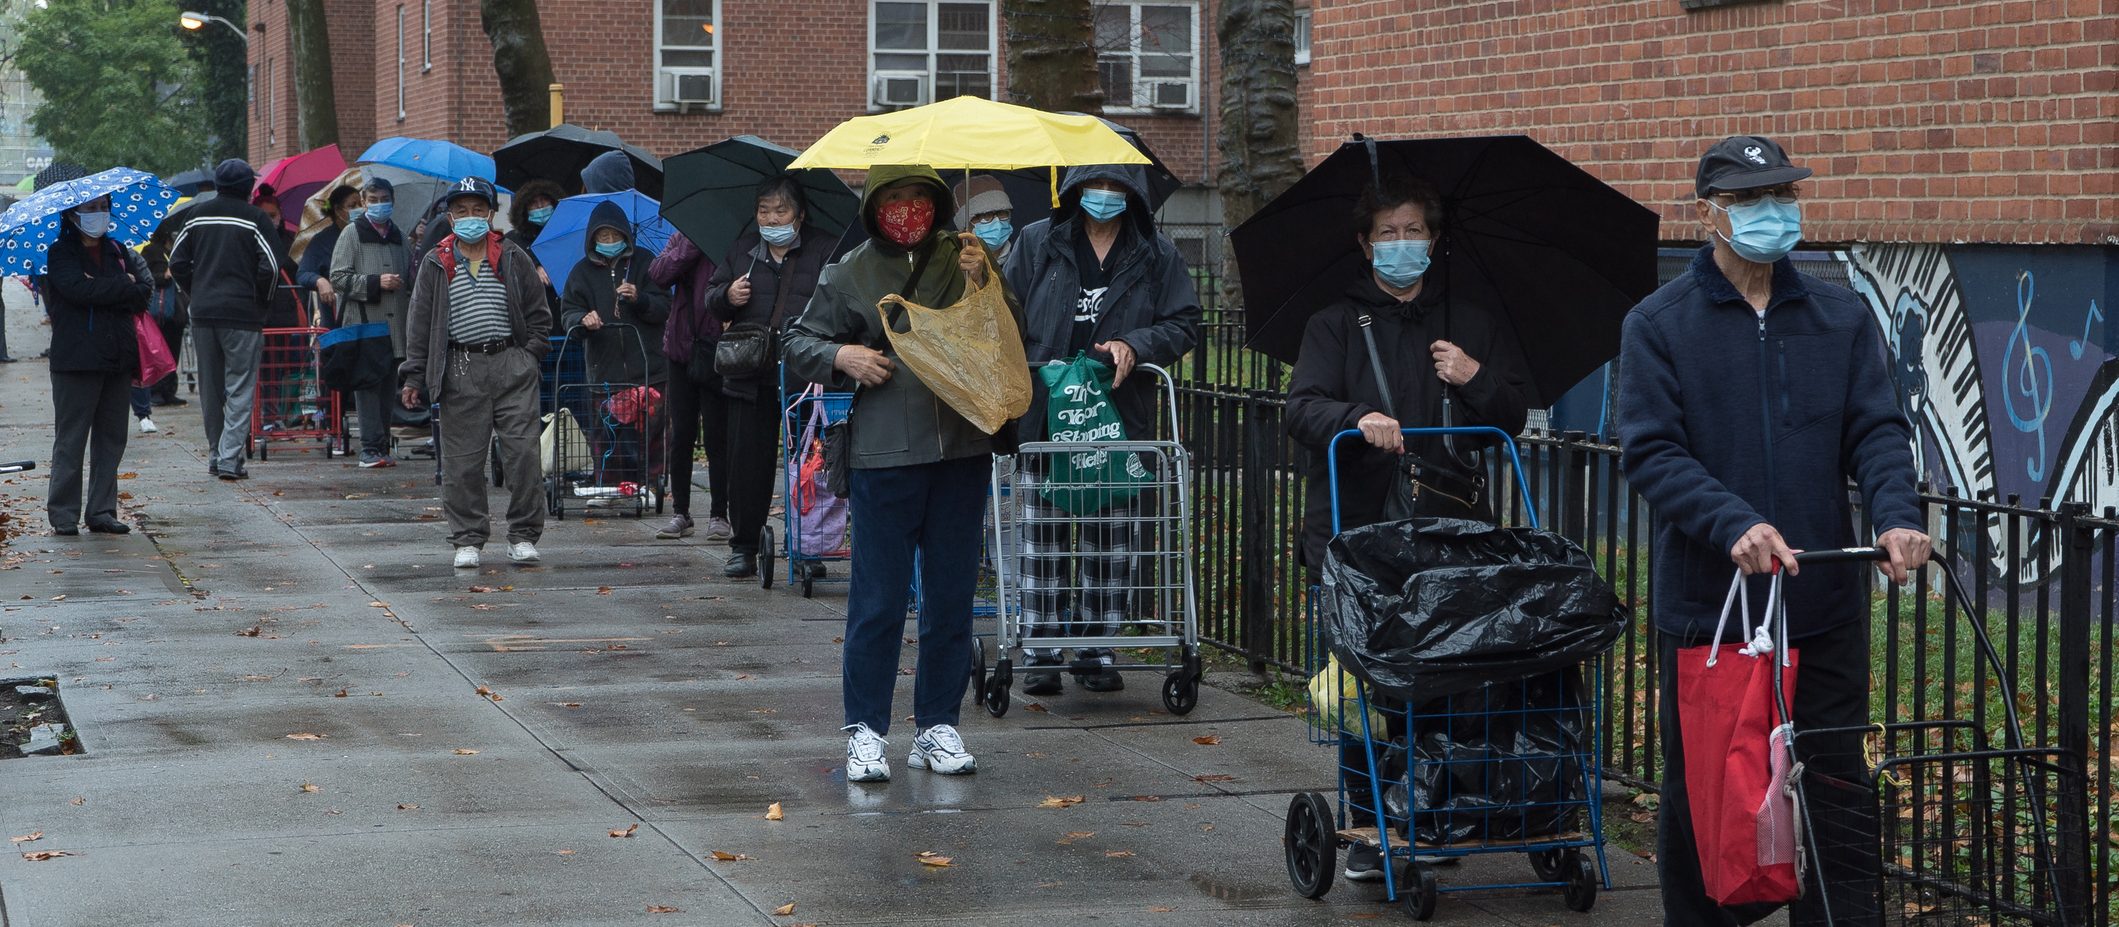 Queens, New York. October 28, 2020. A large crowd of people wait in line outside an outdoor food pantry in Woodside organized by "Sunnyside Community Services"